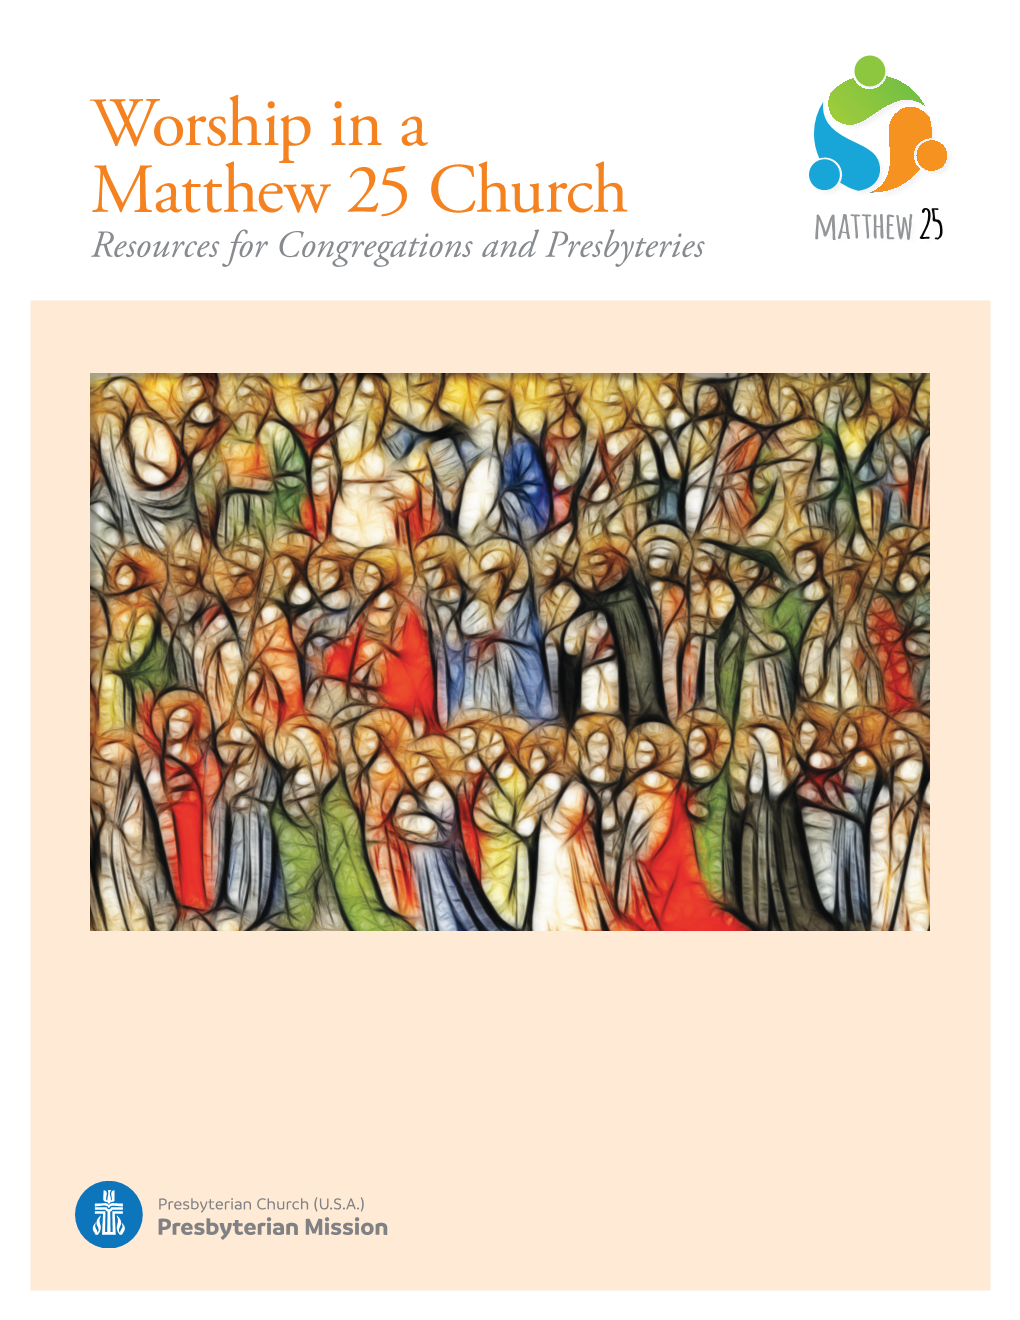 Worship in a Matthew 25 Church Resources for Congregations and Presbyteries